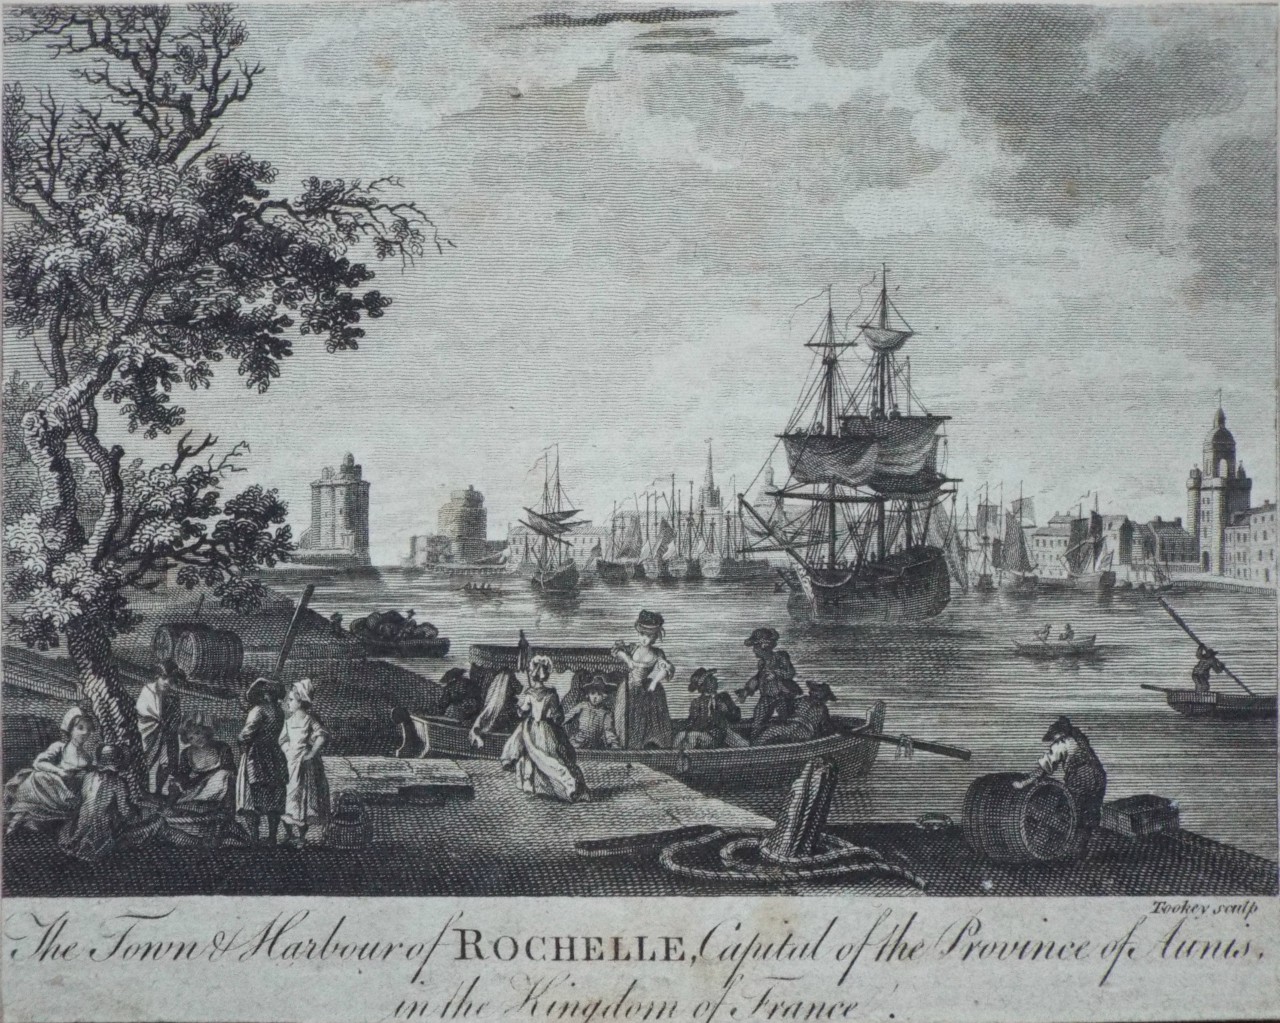 Print - The Town & Harbour of Rochelle, Capital of the Province of Aunis, in the Kingdom of France. - 